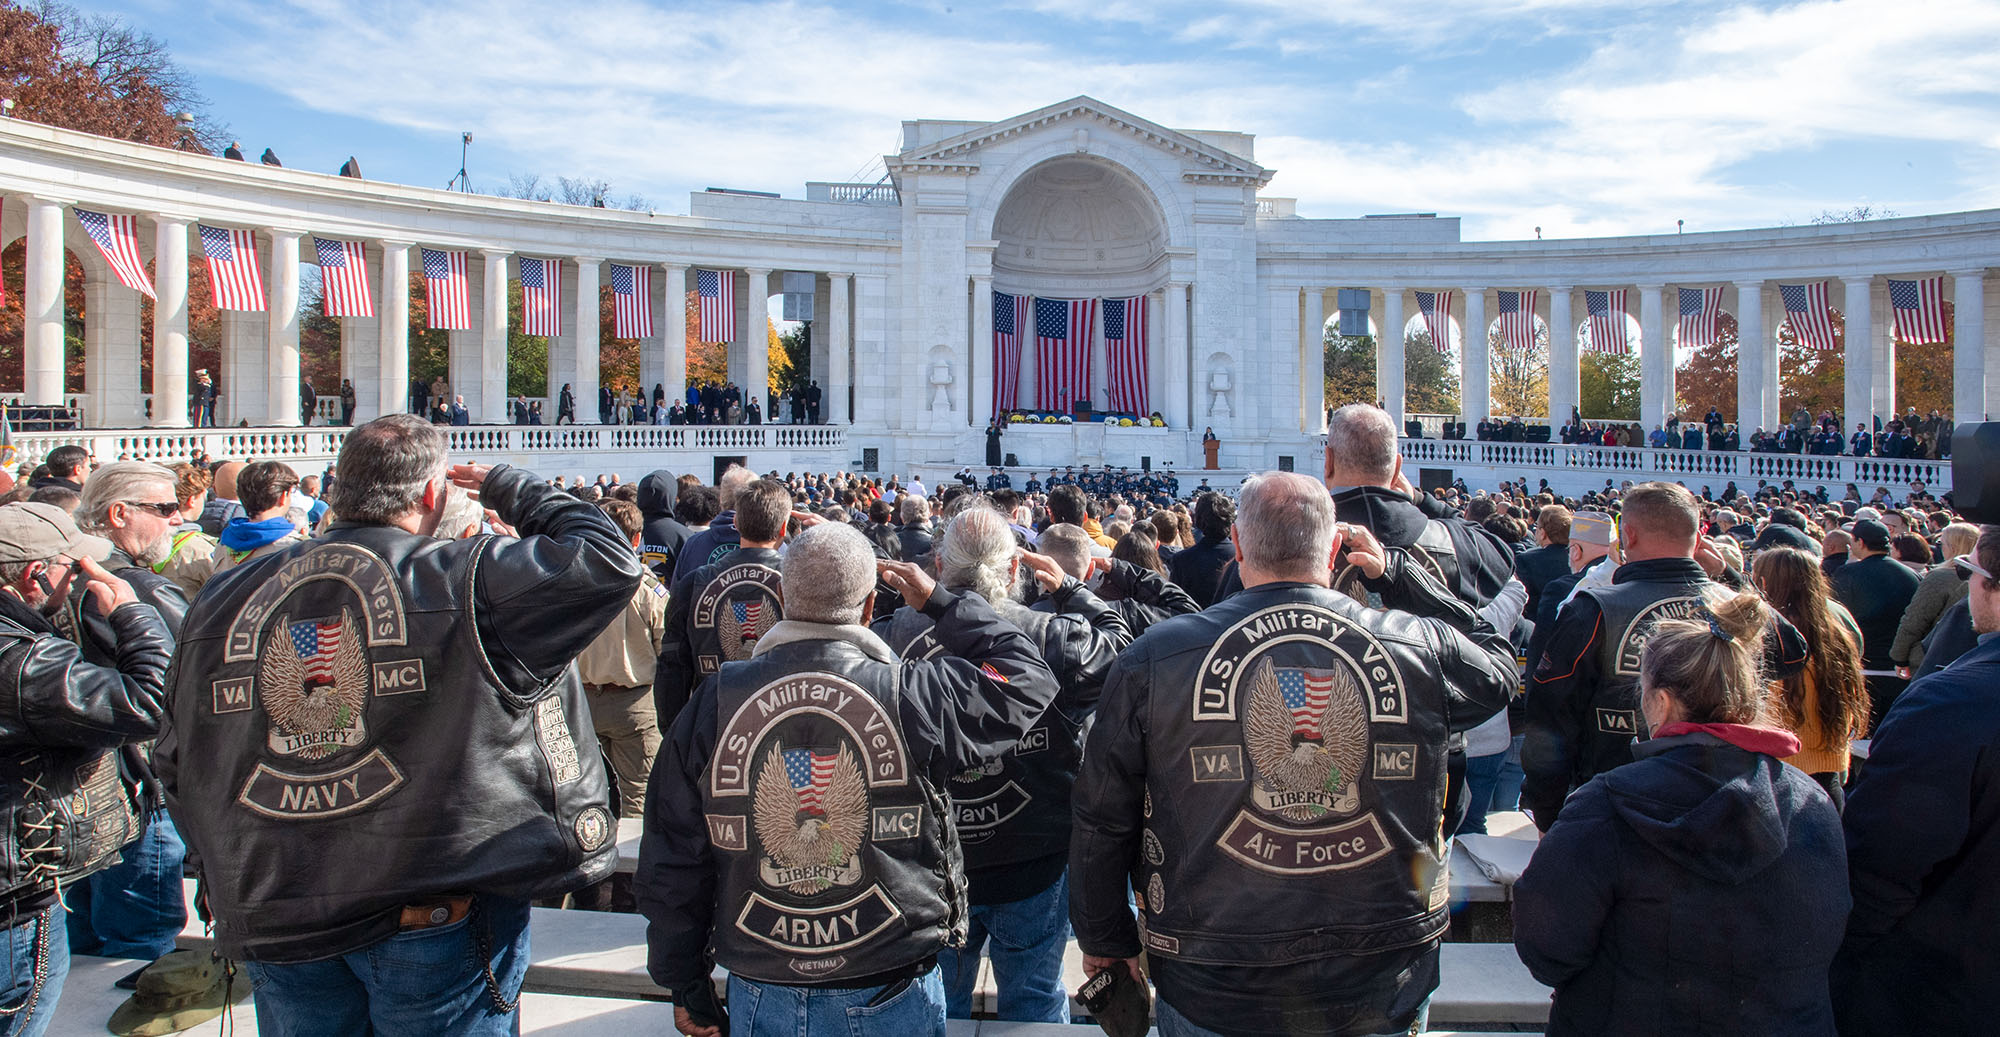 A diverse group of Veterans rendering a salute at the World War II memorial.